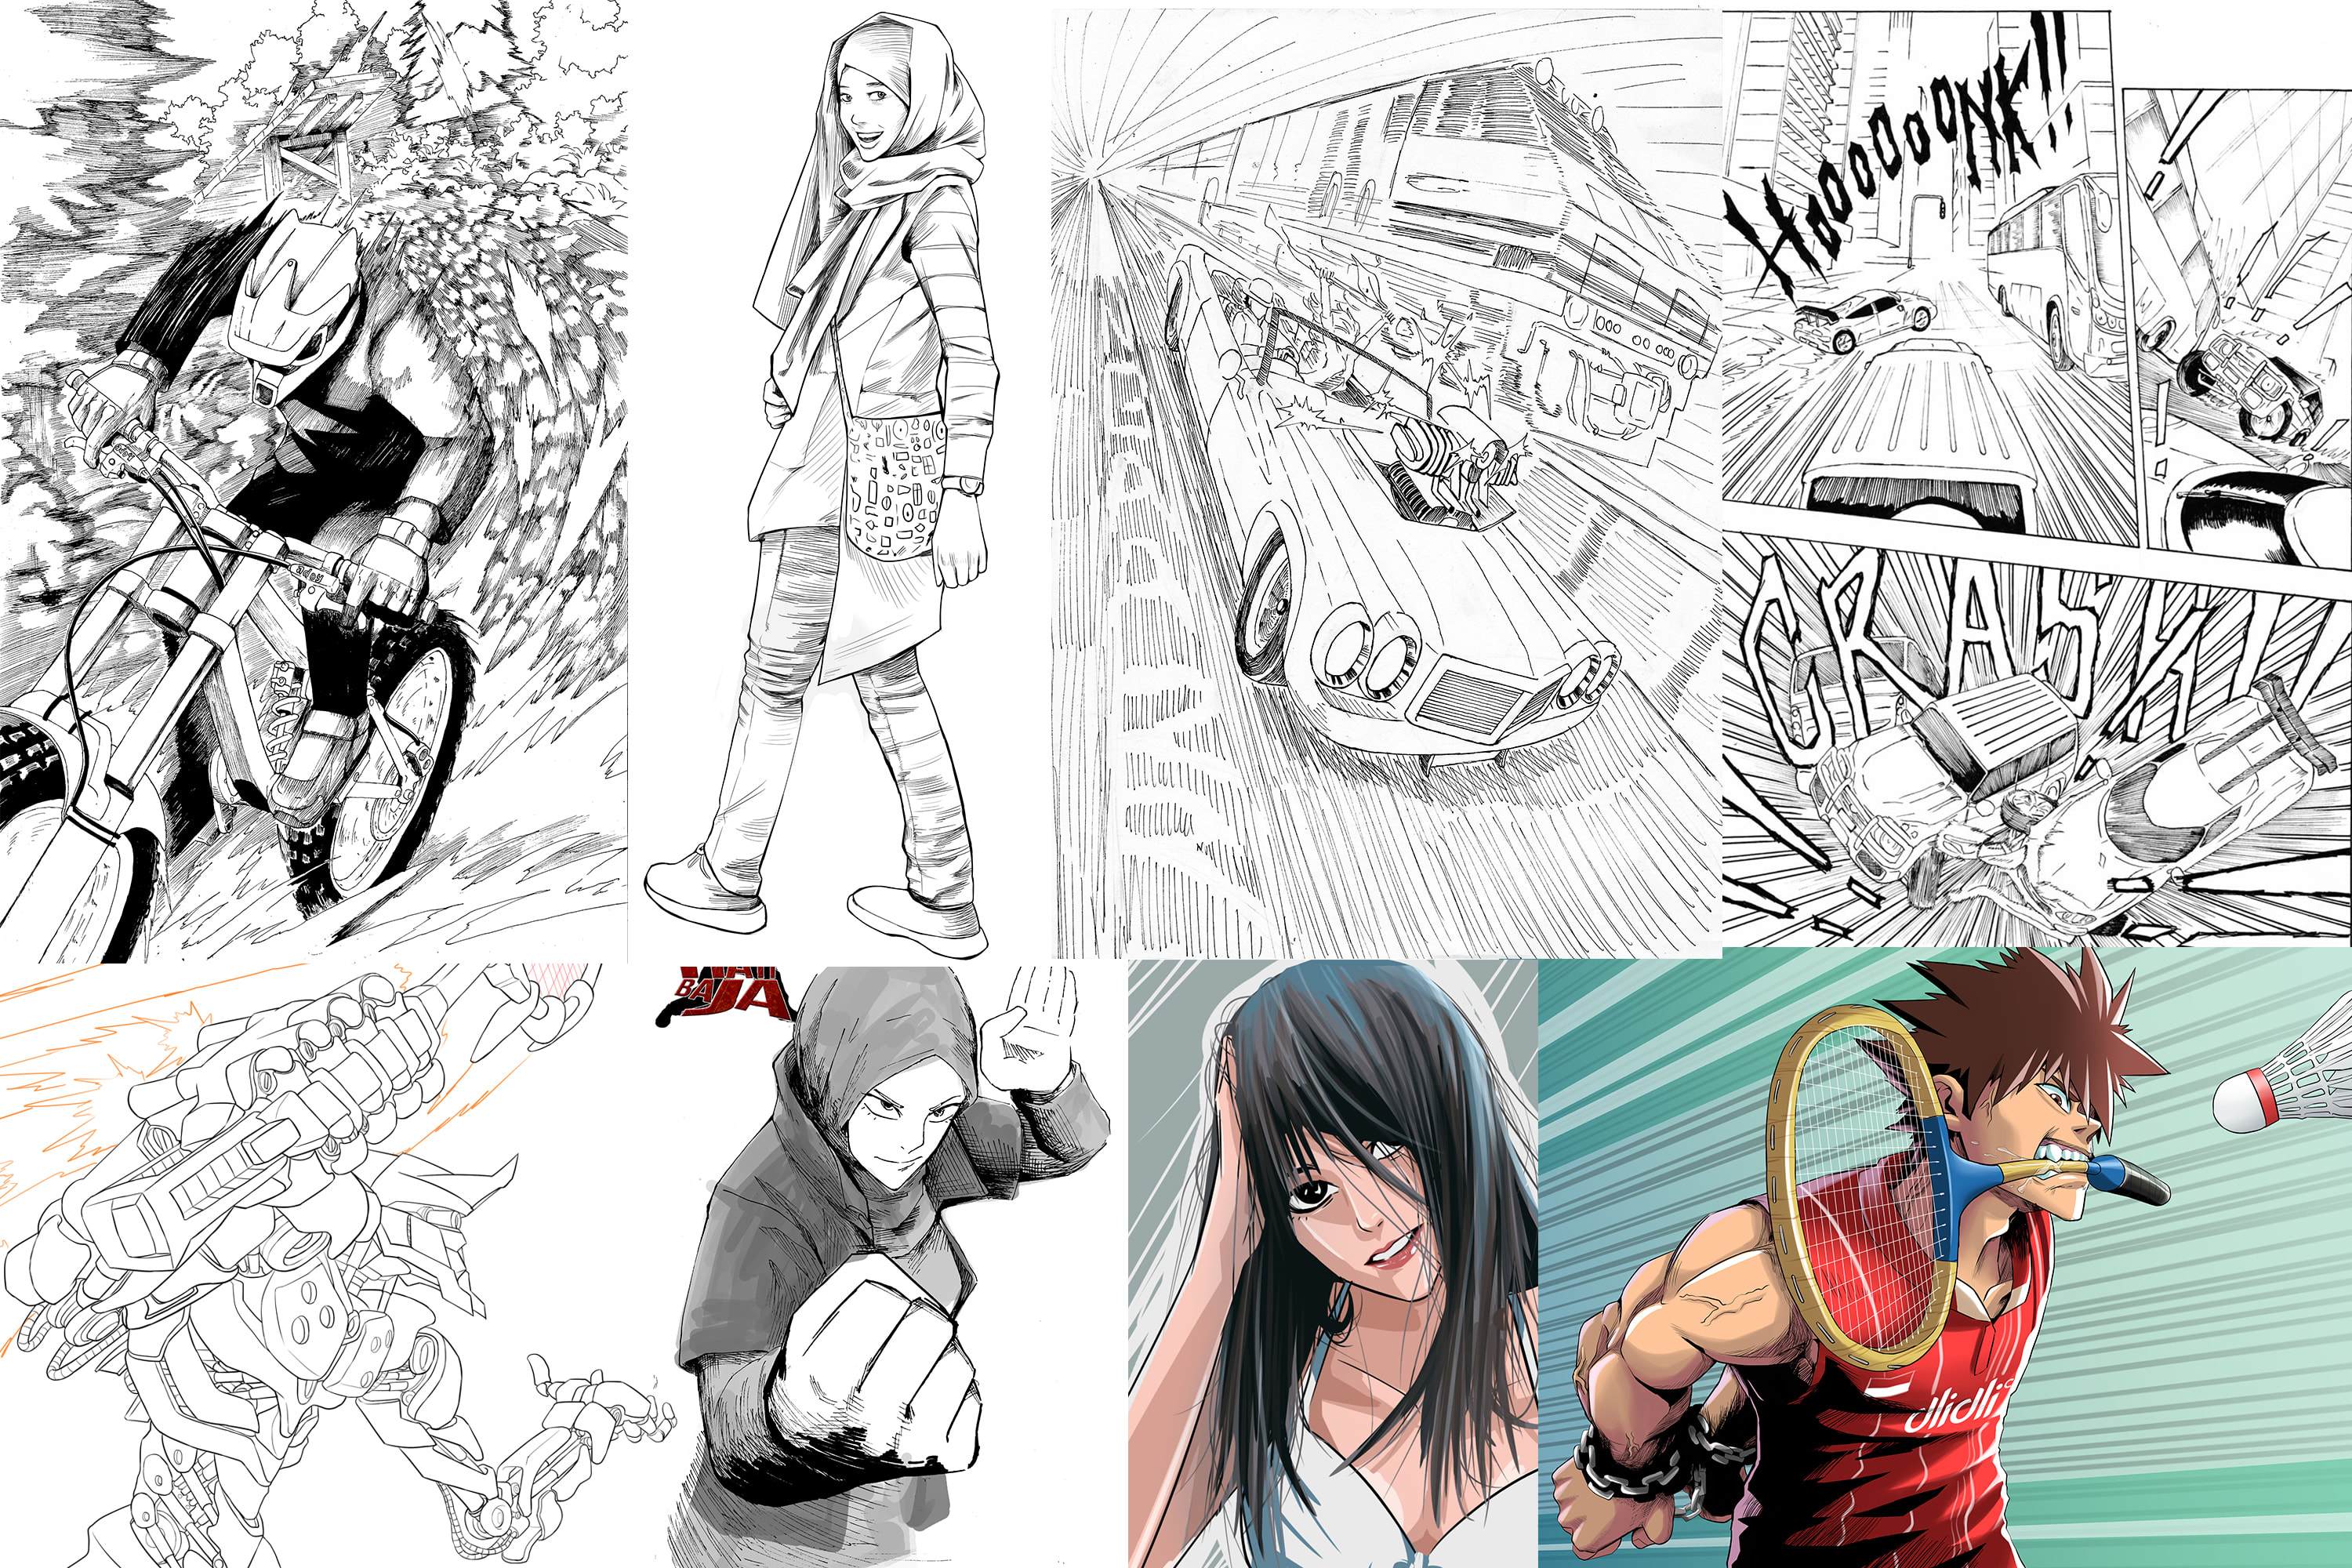 Draw manga with action poses, mecha, sci fi by Realmextreme | Fiverr